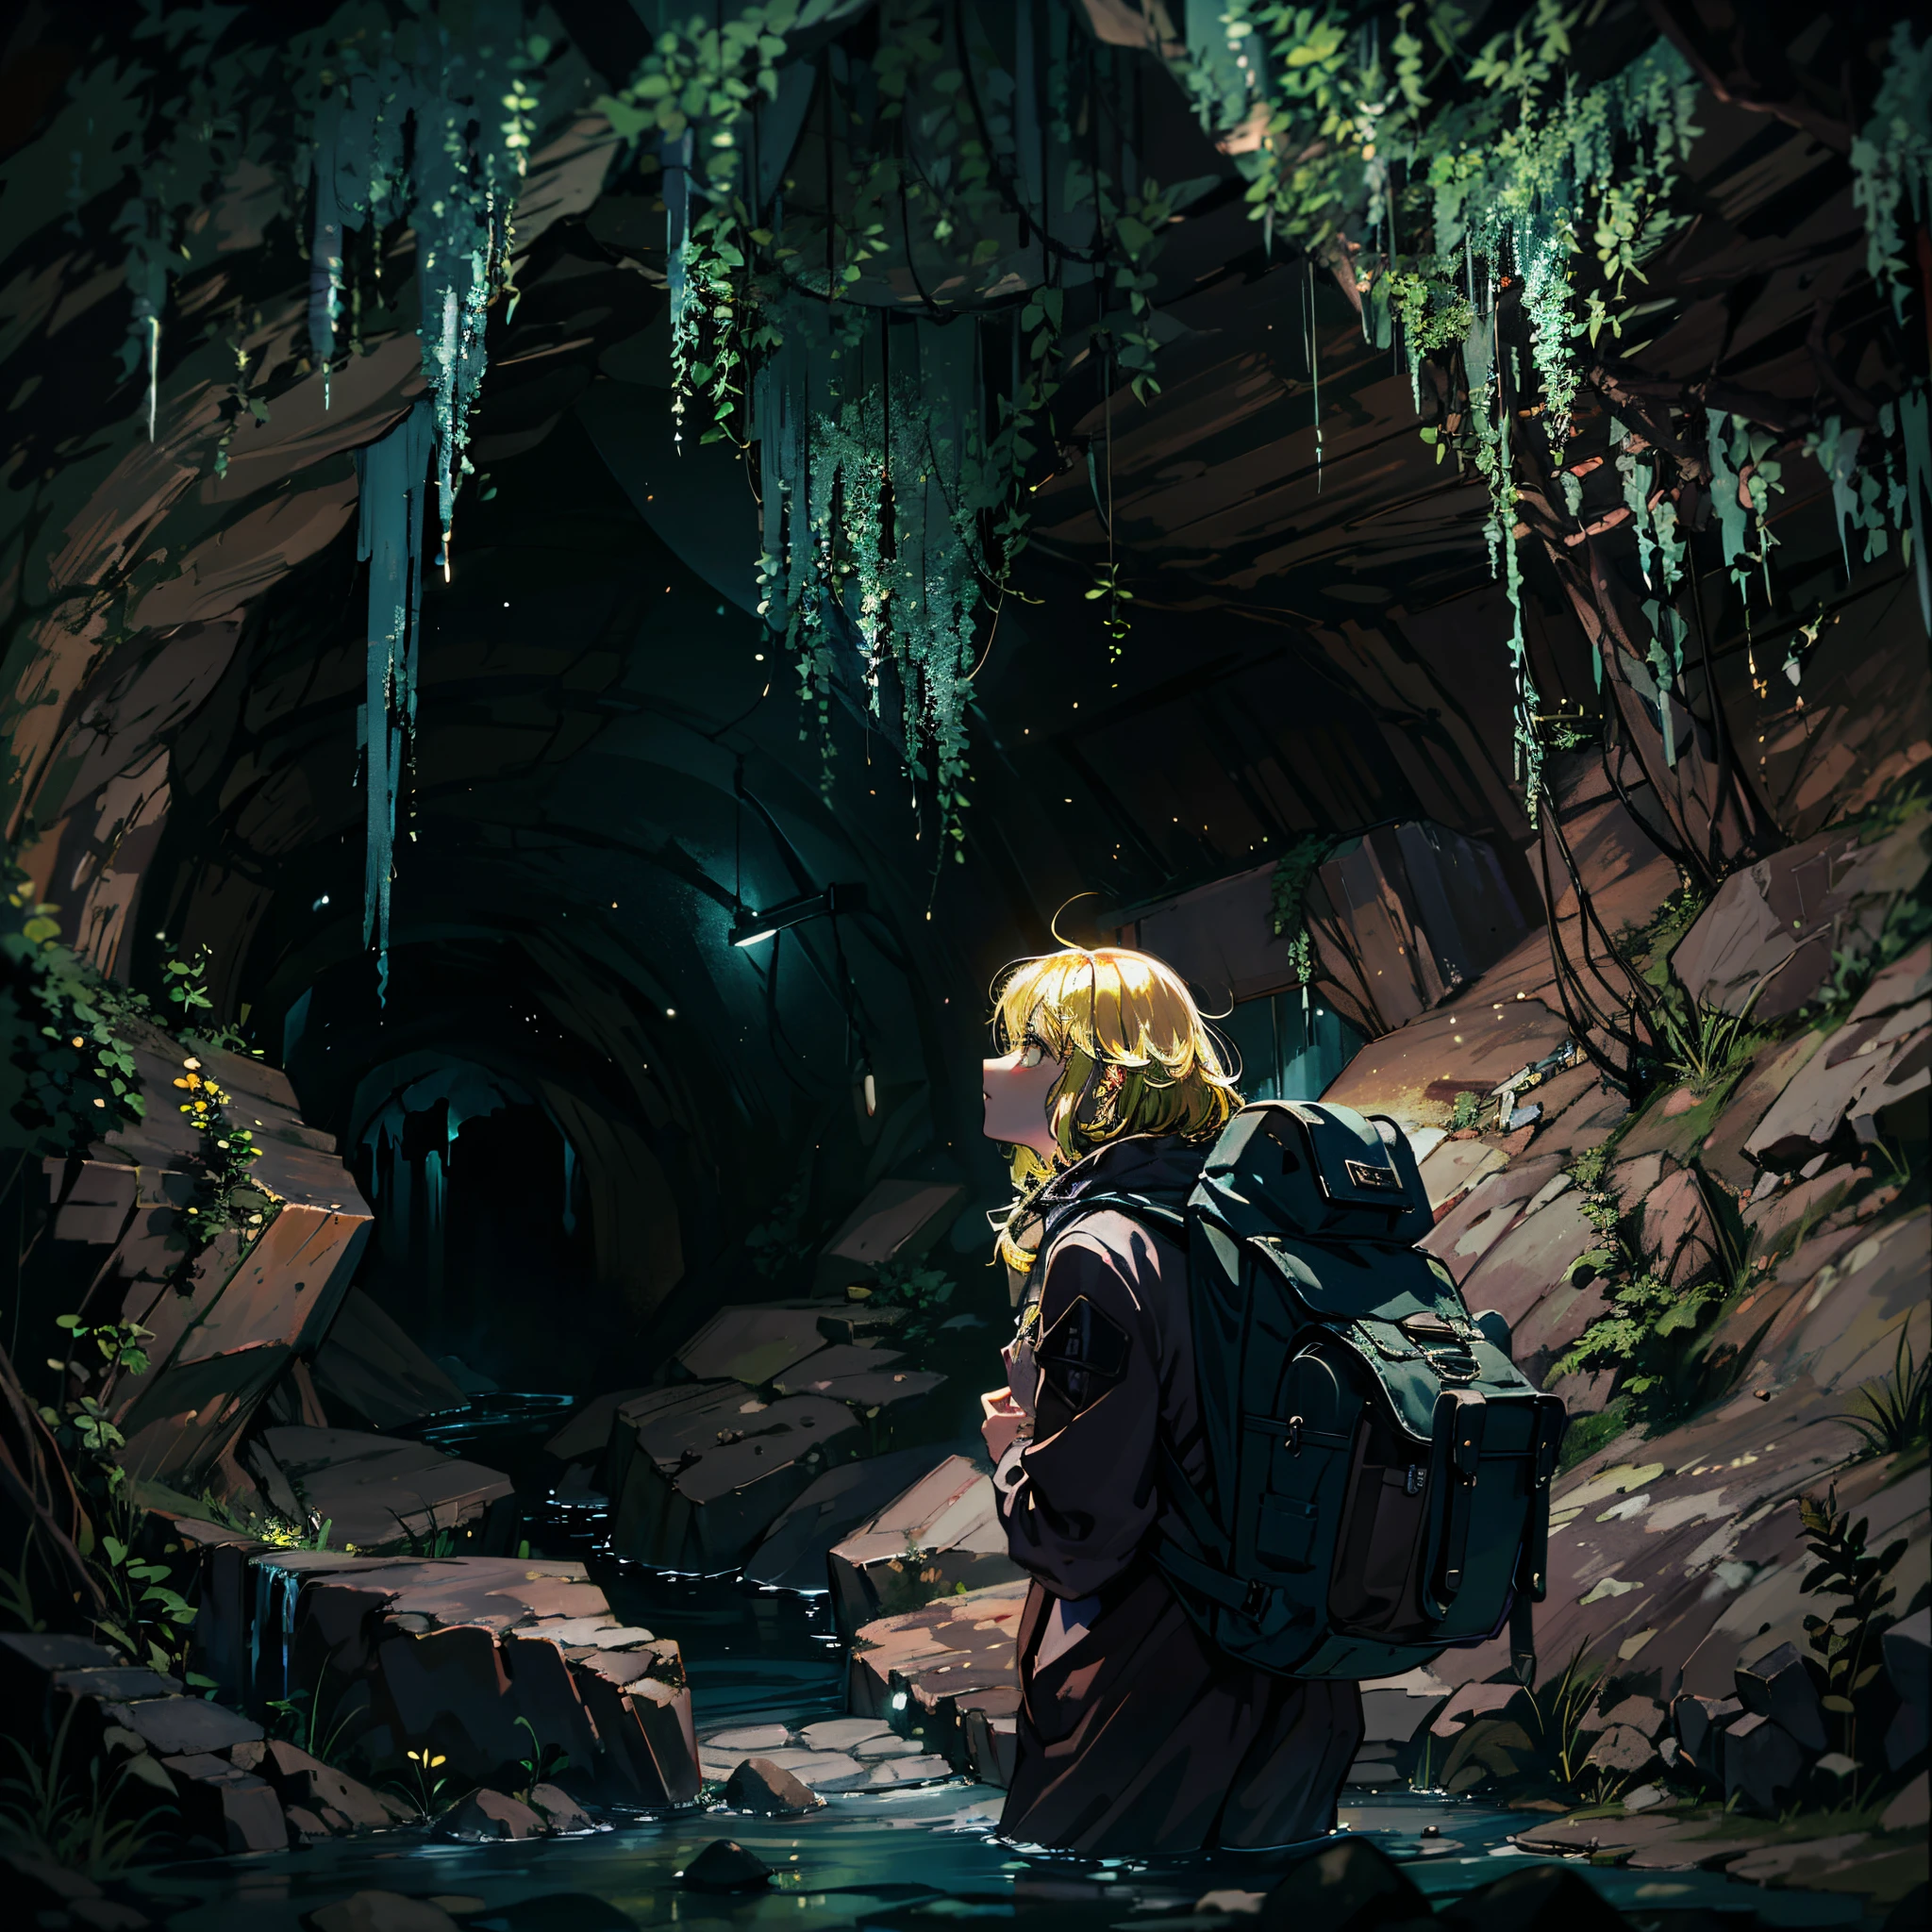 Darkness without light deep underground, eerie limestone caves, icicles, tense air, broken stone statues, a small oasis in the cave, lights, faint light overflowing from the spring, 1 girl, adventurer, big Rucksack, blonde hair, short bob, cinematic light.